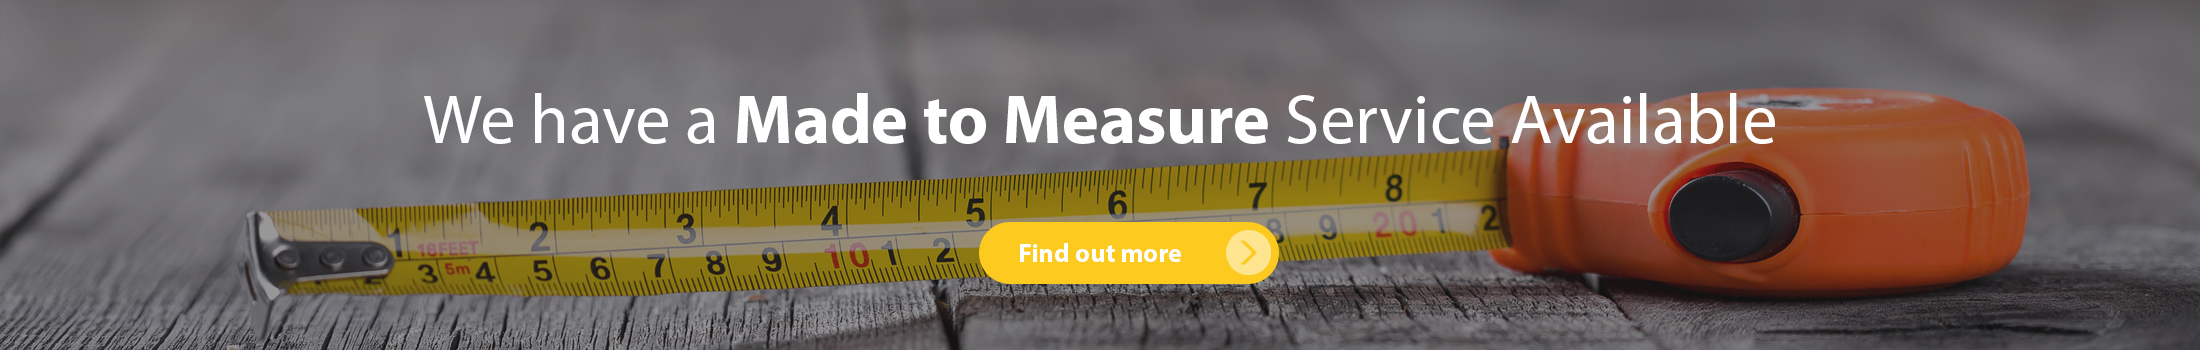 We have a made to measure service available - Click here to learn more about this option